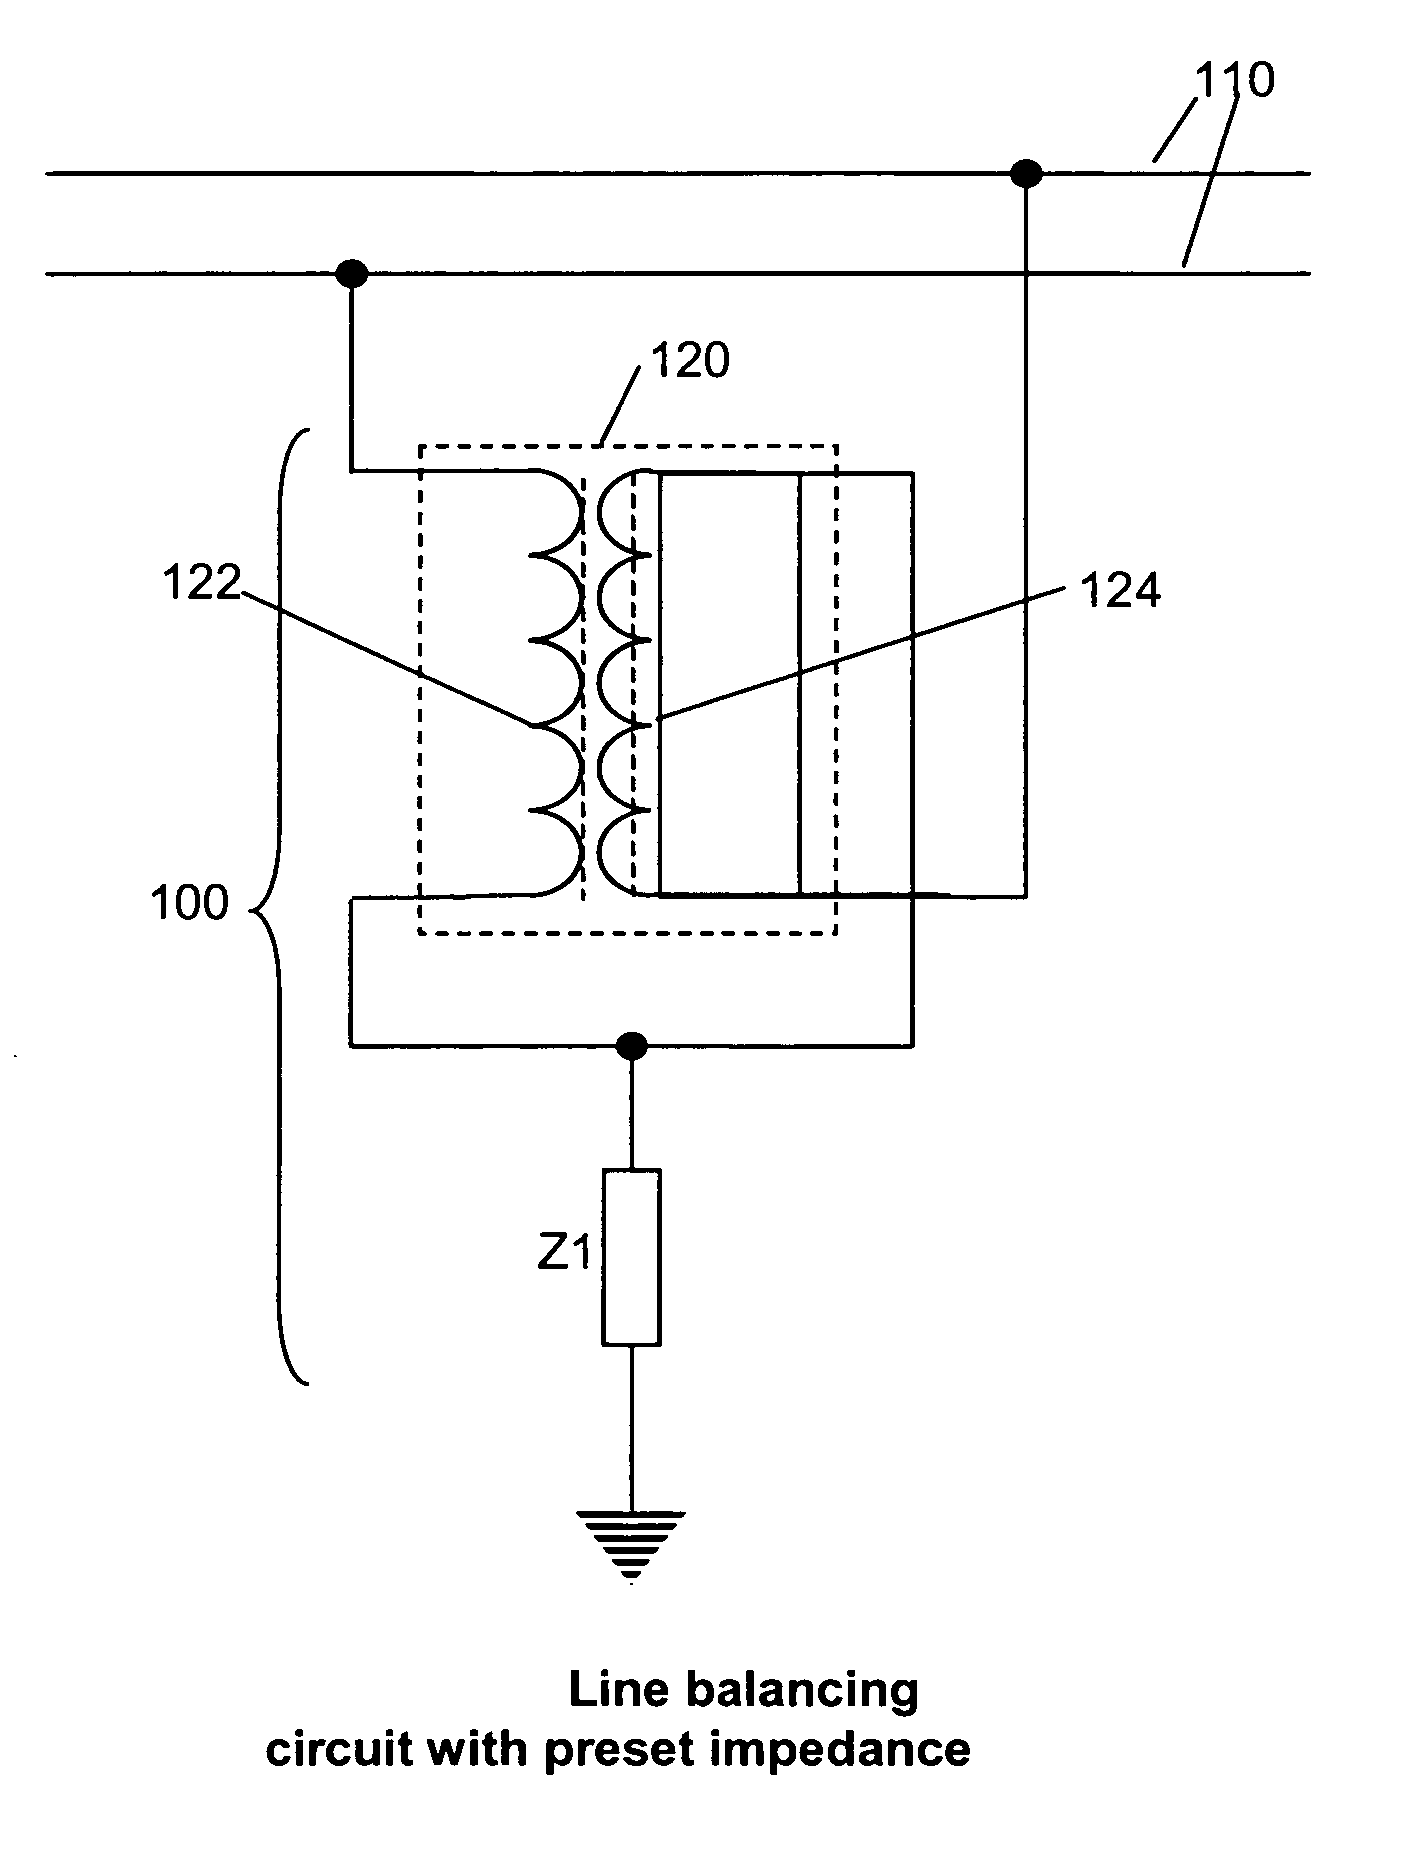 Reduction of noise in a metallic conductor signal pair using controlled line balancing and common mode impedance reduction